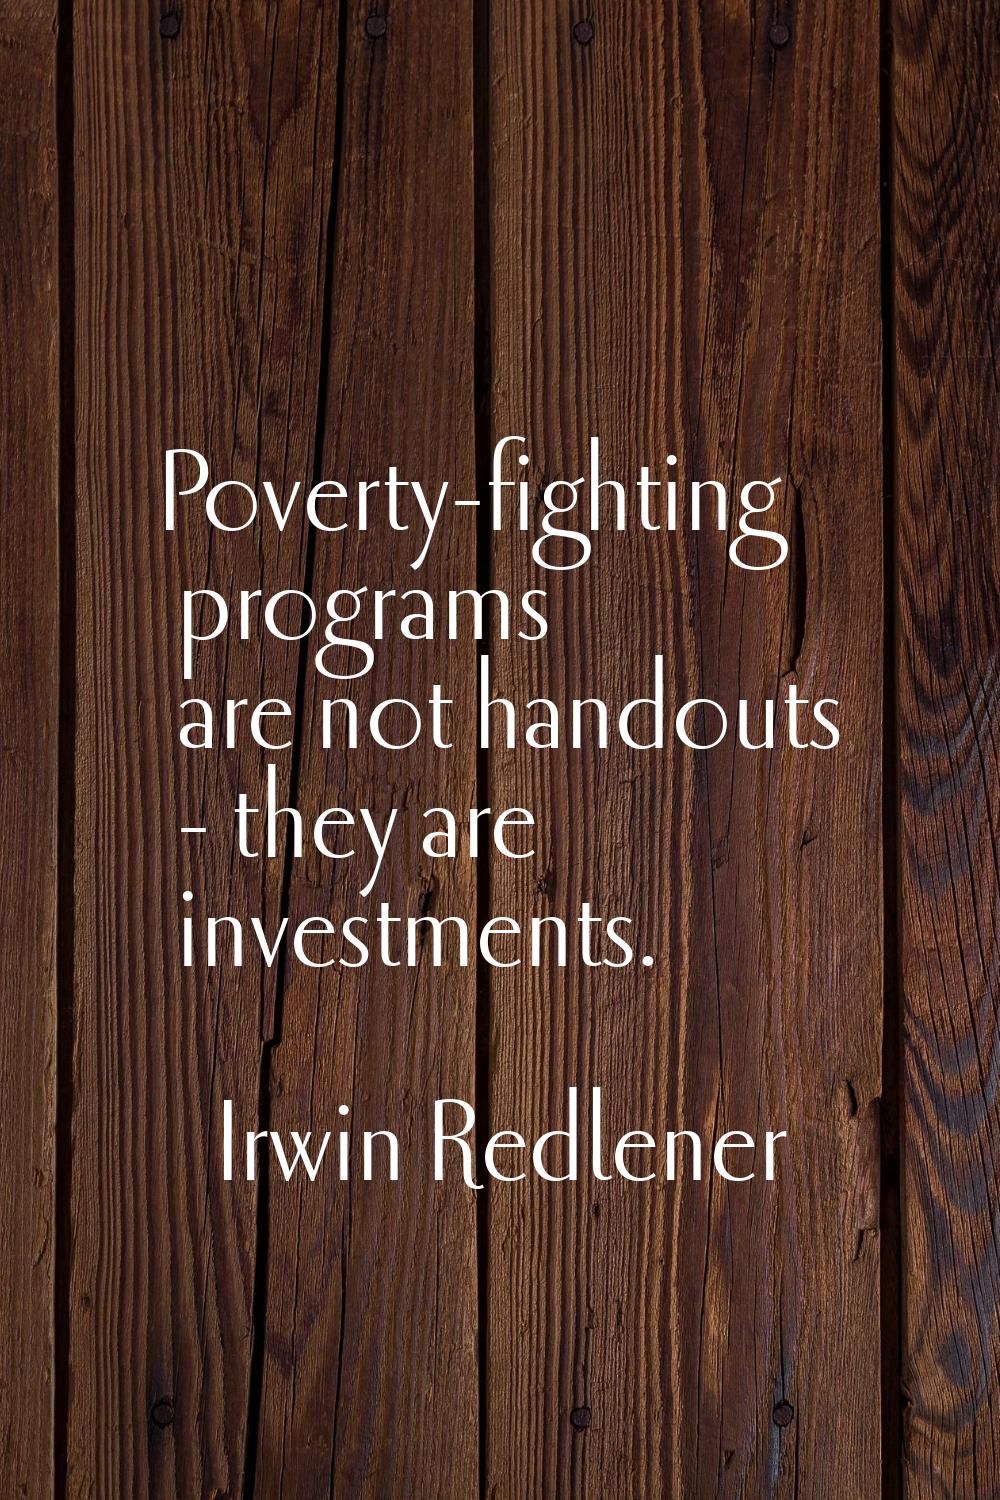 Poverty-fighting programs are not handouts - they are investments.